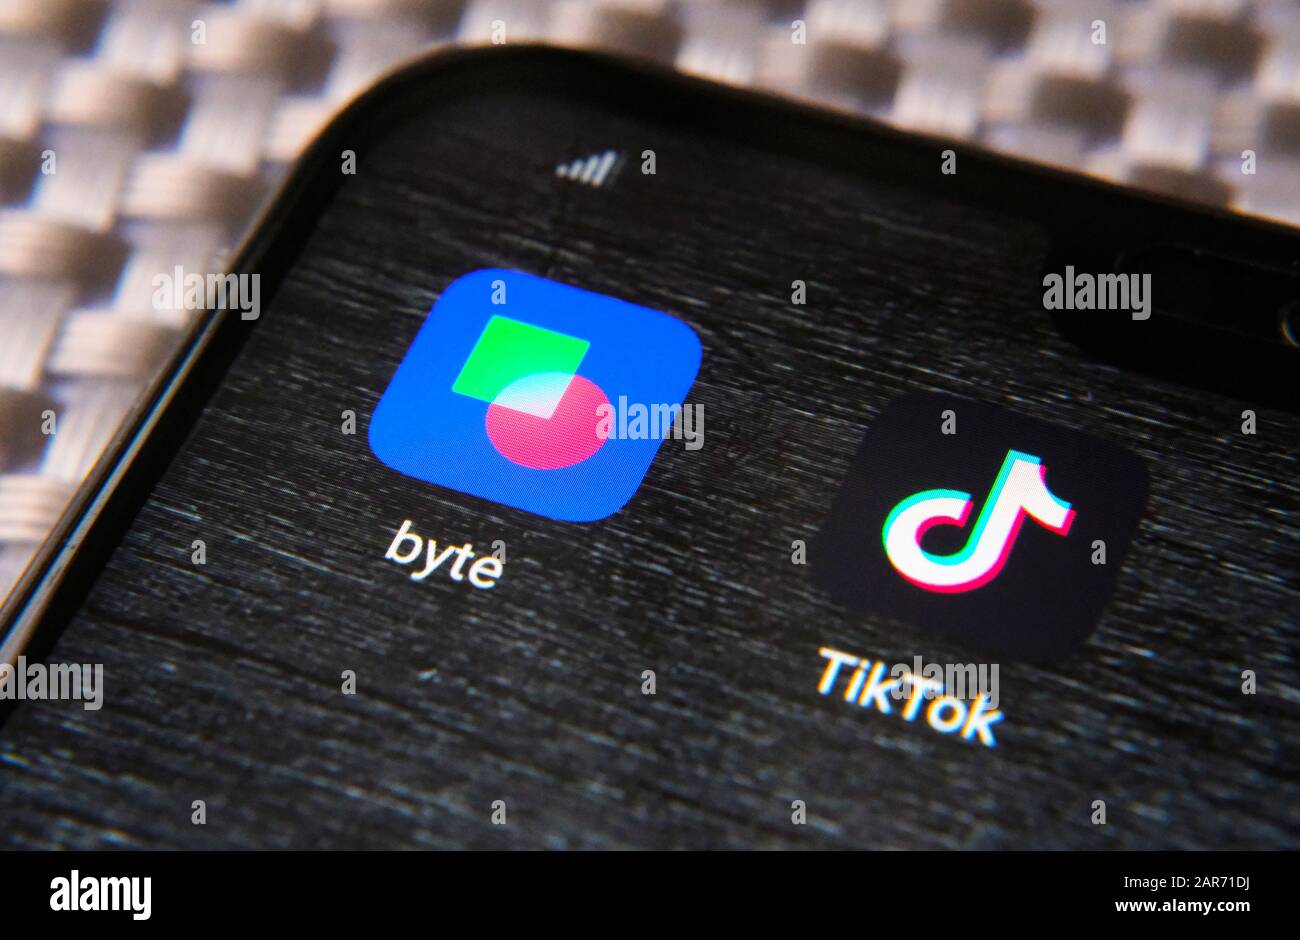 Byte app and Tiktok app in the corner of smartphone. Byte is the sequel to Vine app and potential competitor to TikTok. Stock Photo